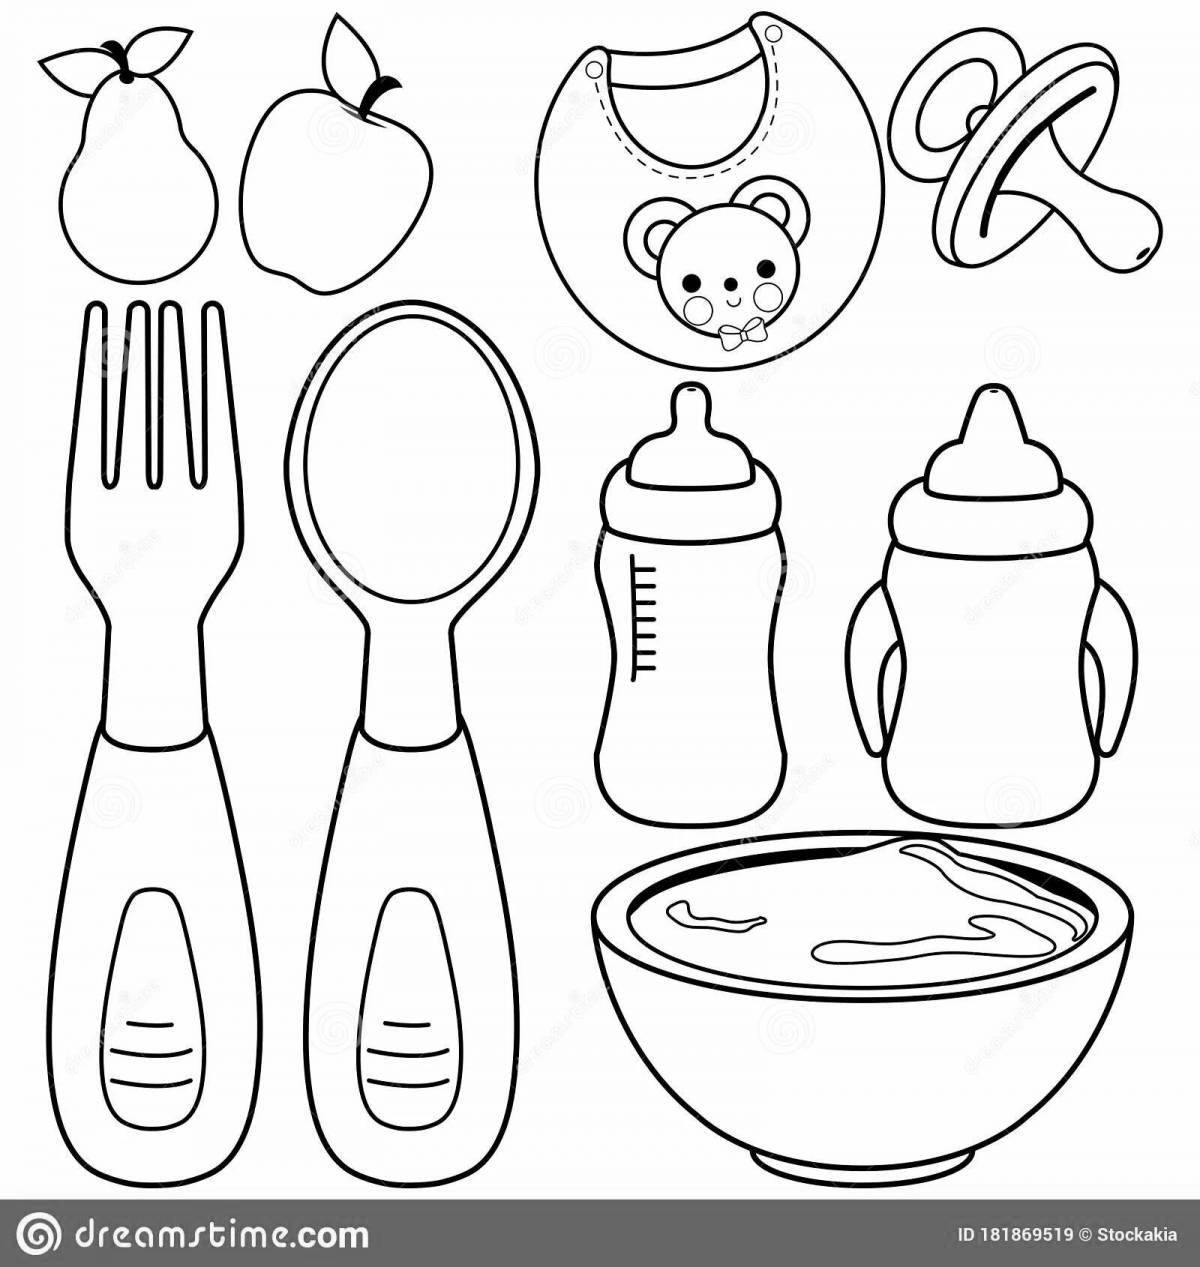 Colorful dishes and food coloring page